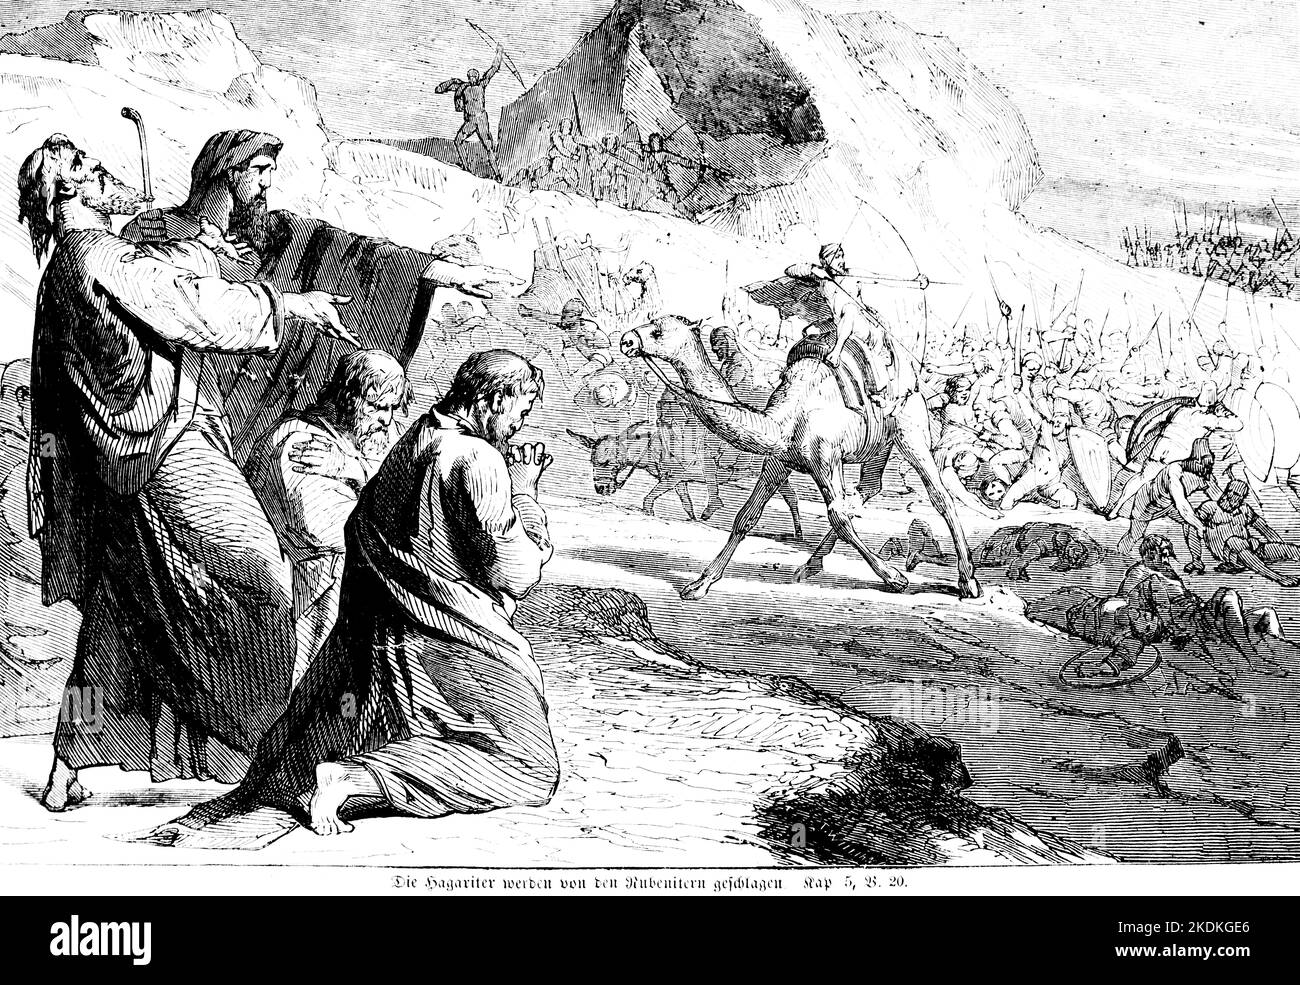 Hagarites are defeated by  the Reuben, and Gadites, Bible, Old Testament, First Book of the Chonicles, Chapter 5, 18-20, historical Illustration 1850 Stock Photo